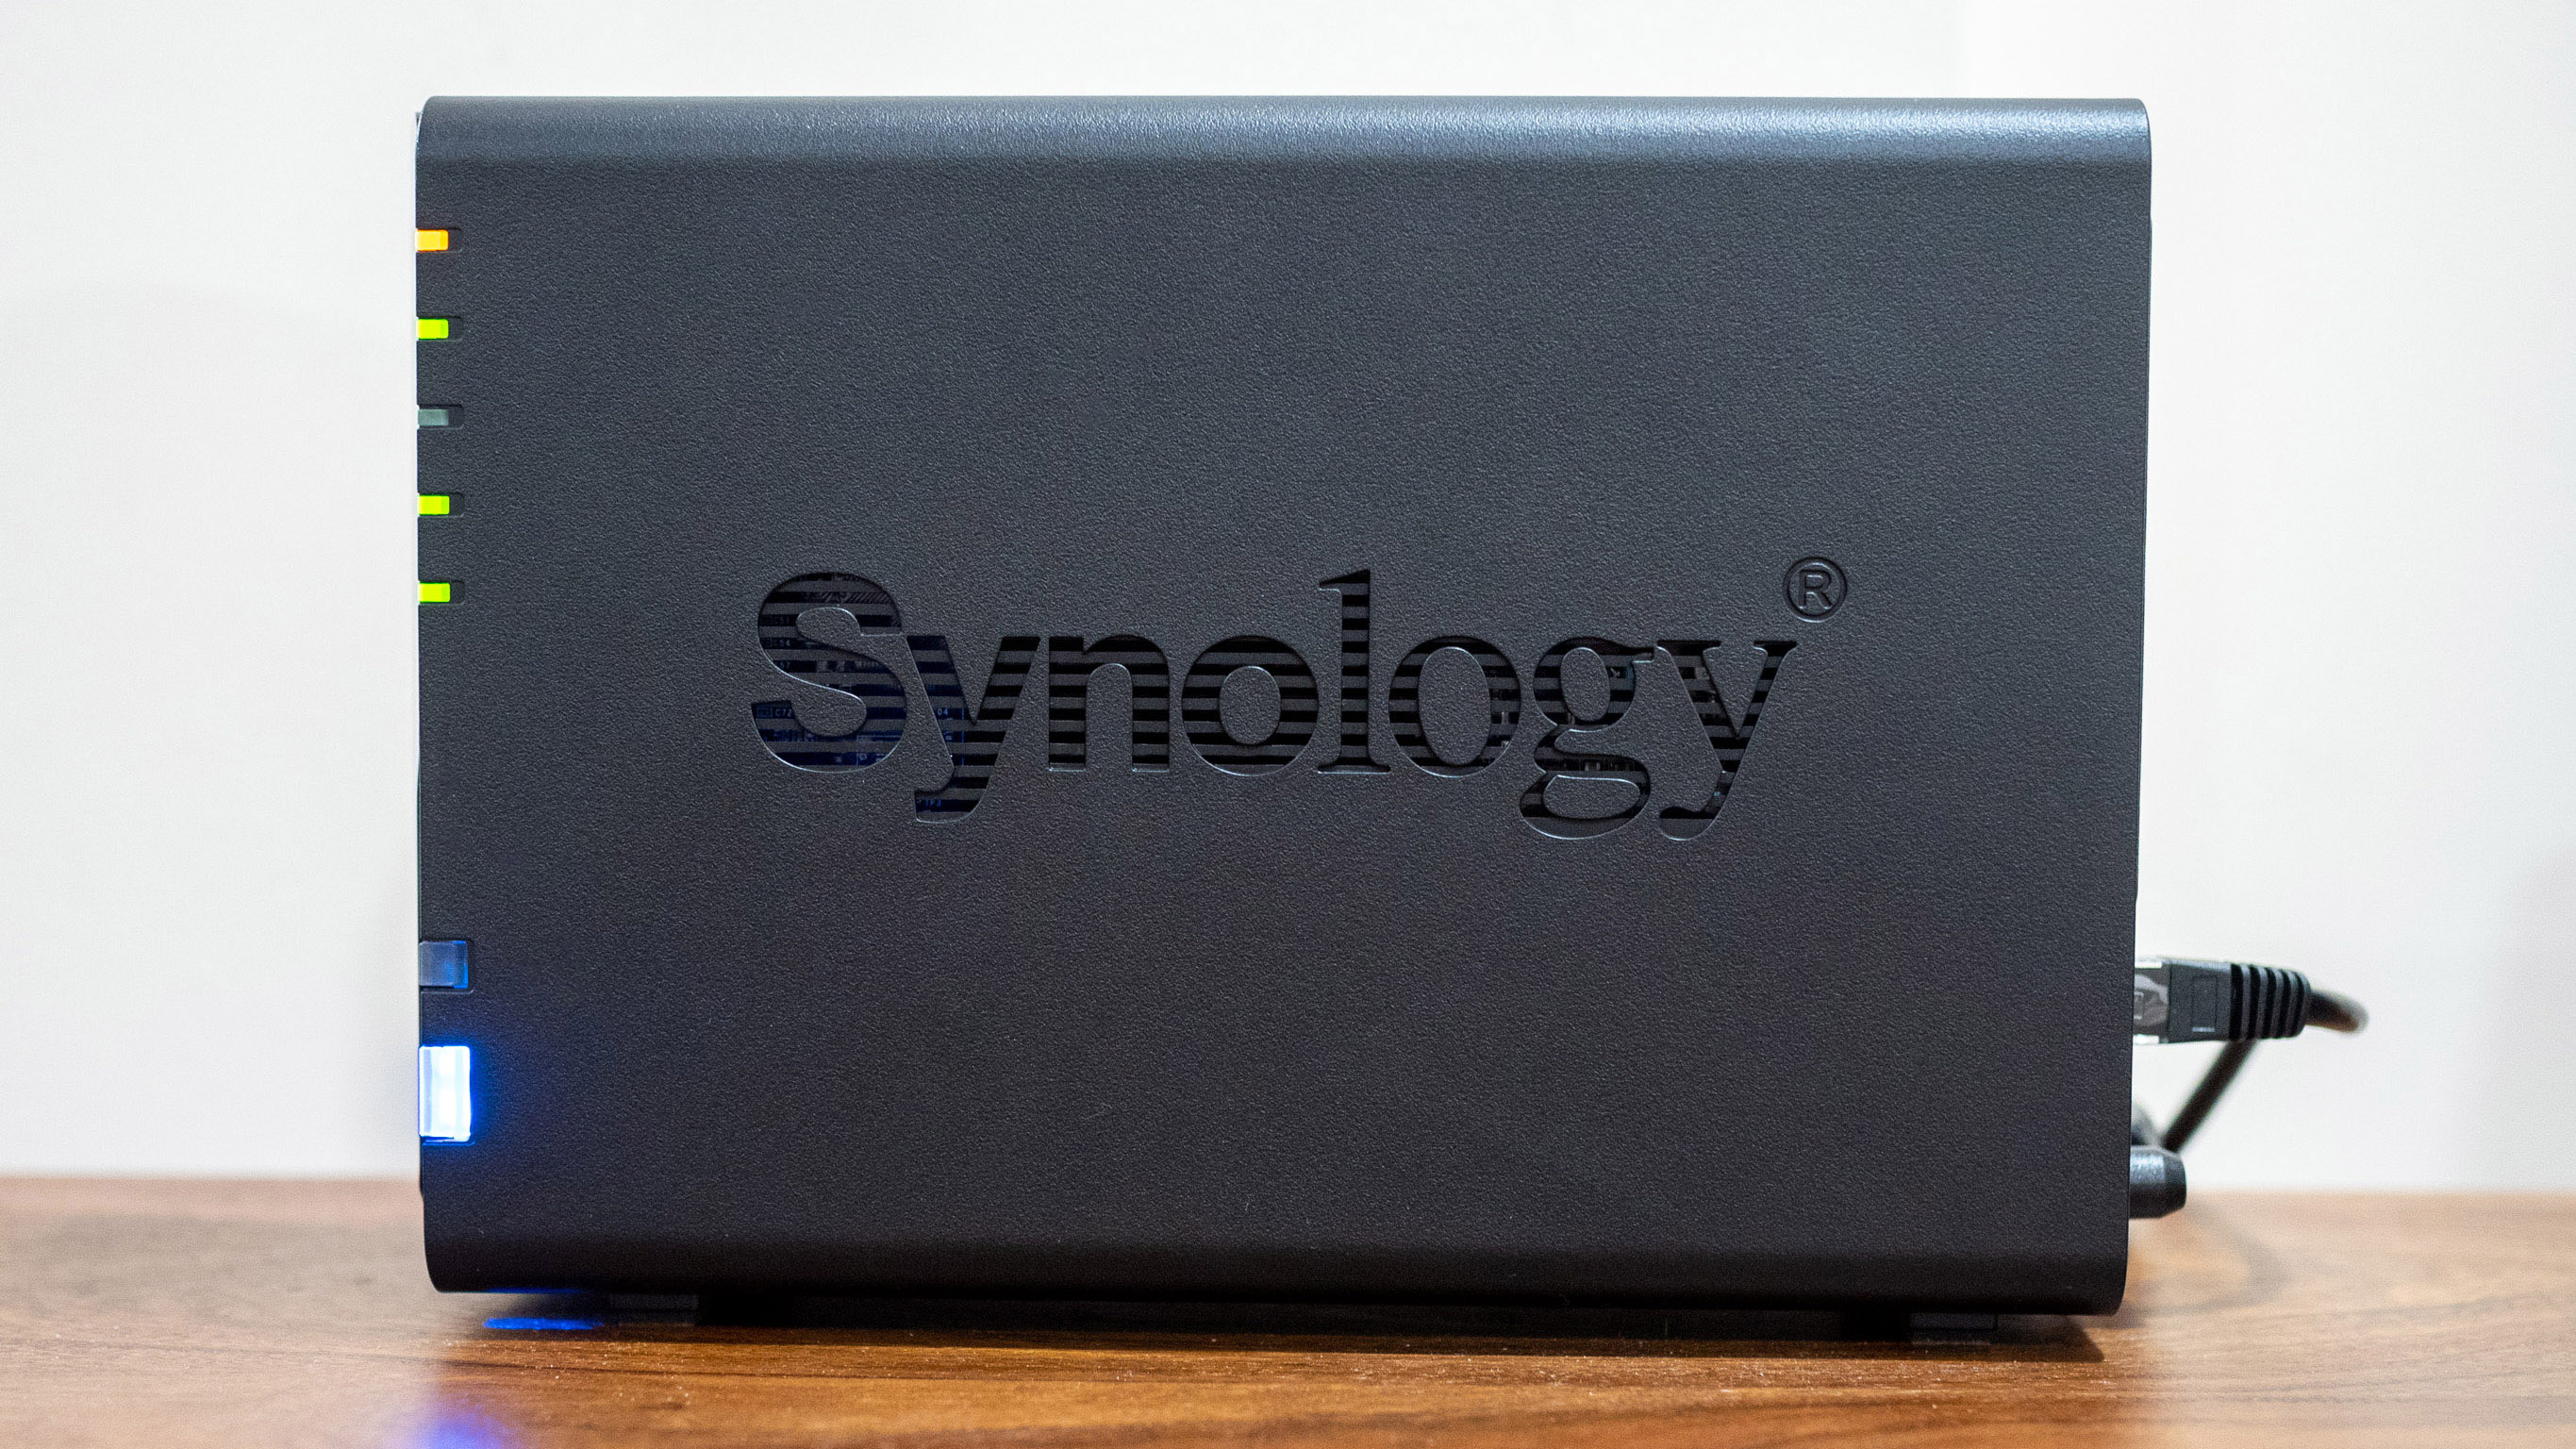 Synology DiskStation DS220+ review